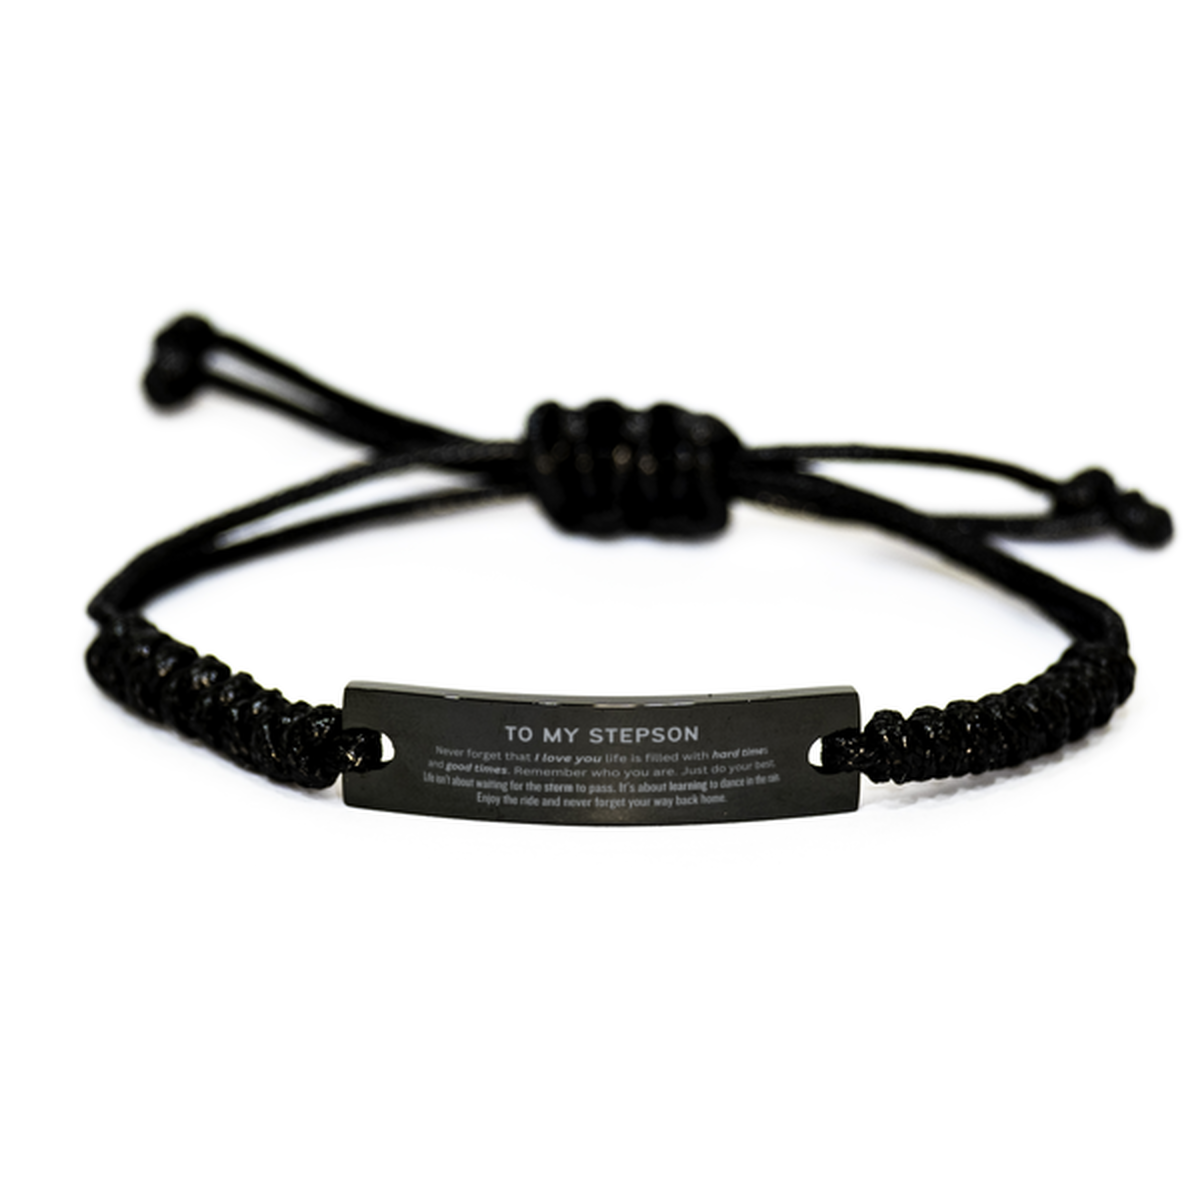 Christmas Stepson Black Rope Bracelet Gifts, To My Stepson Birthday Thank You Gifts For Stepson, Graduation Unique Gifts For Stepson To My Stepson Never forget that I love you life is filled with hard times and good times. Remember who you are. Just do yo